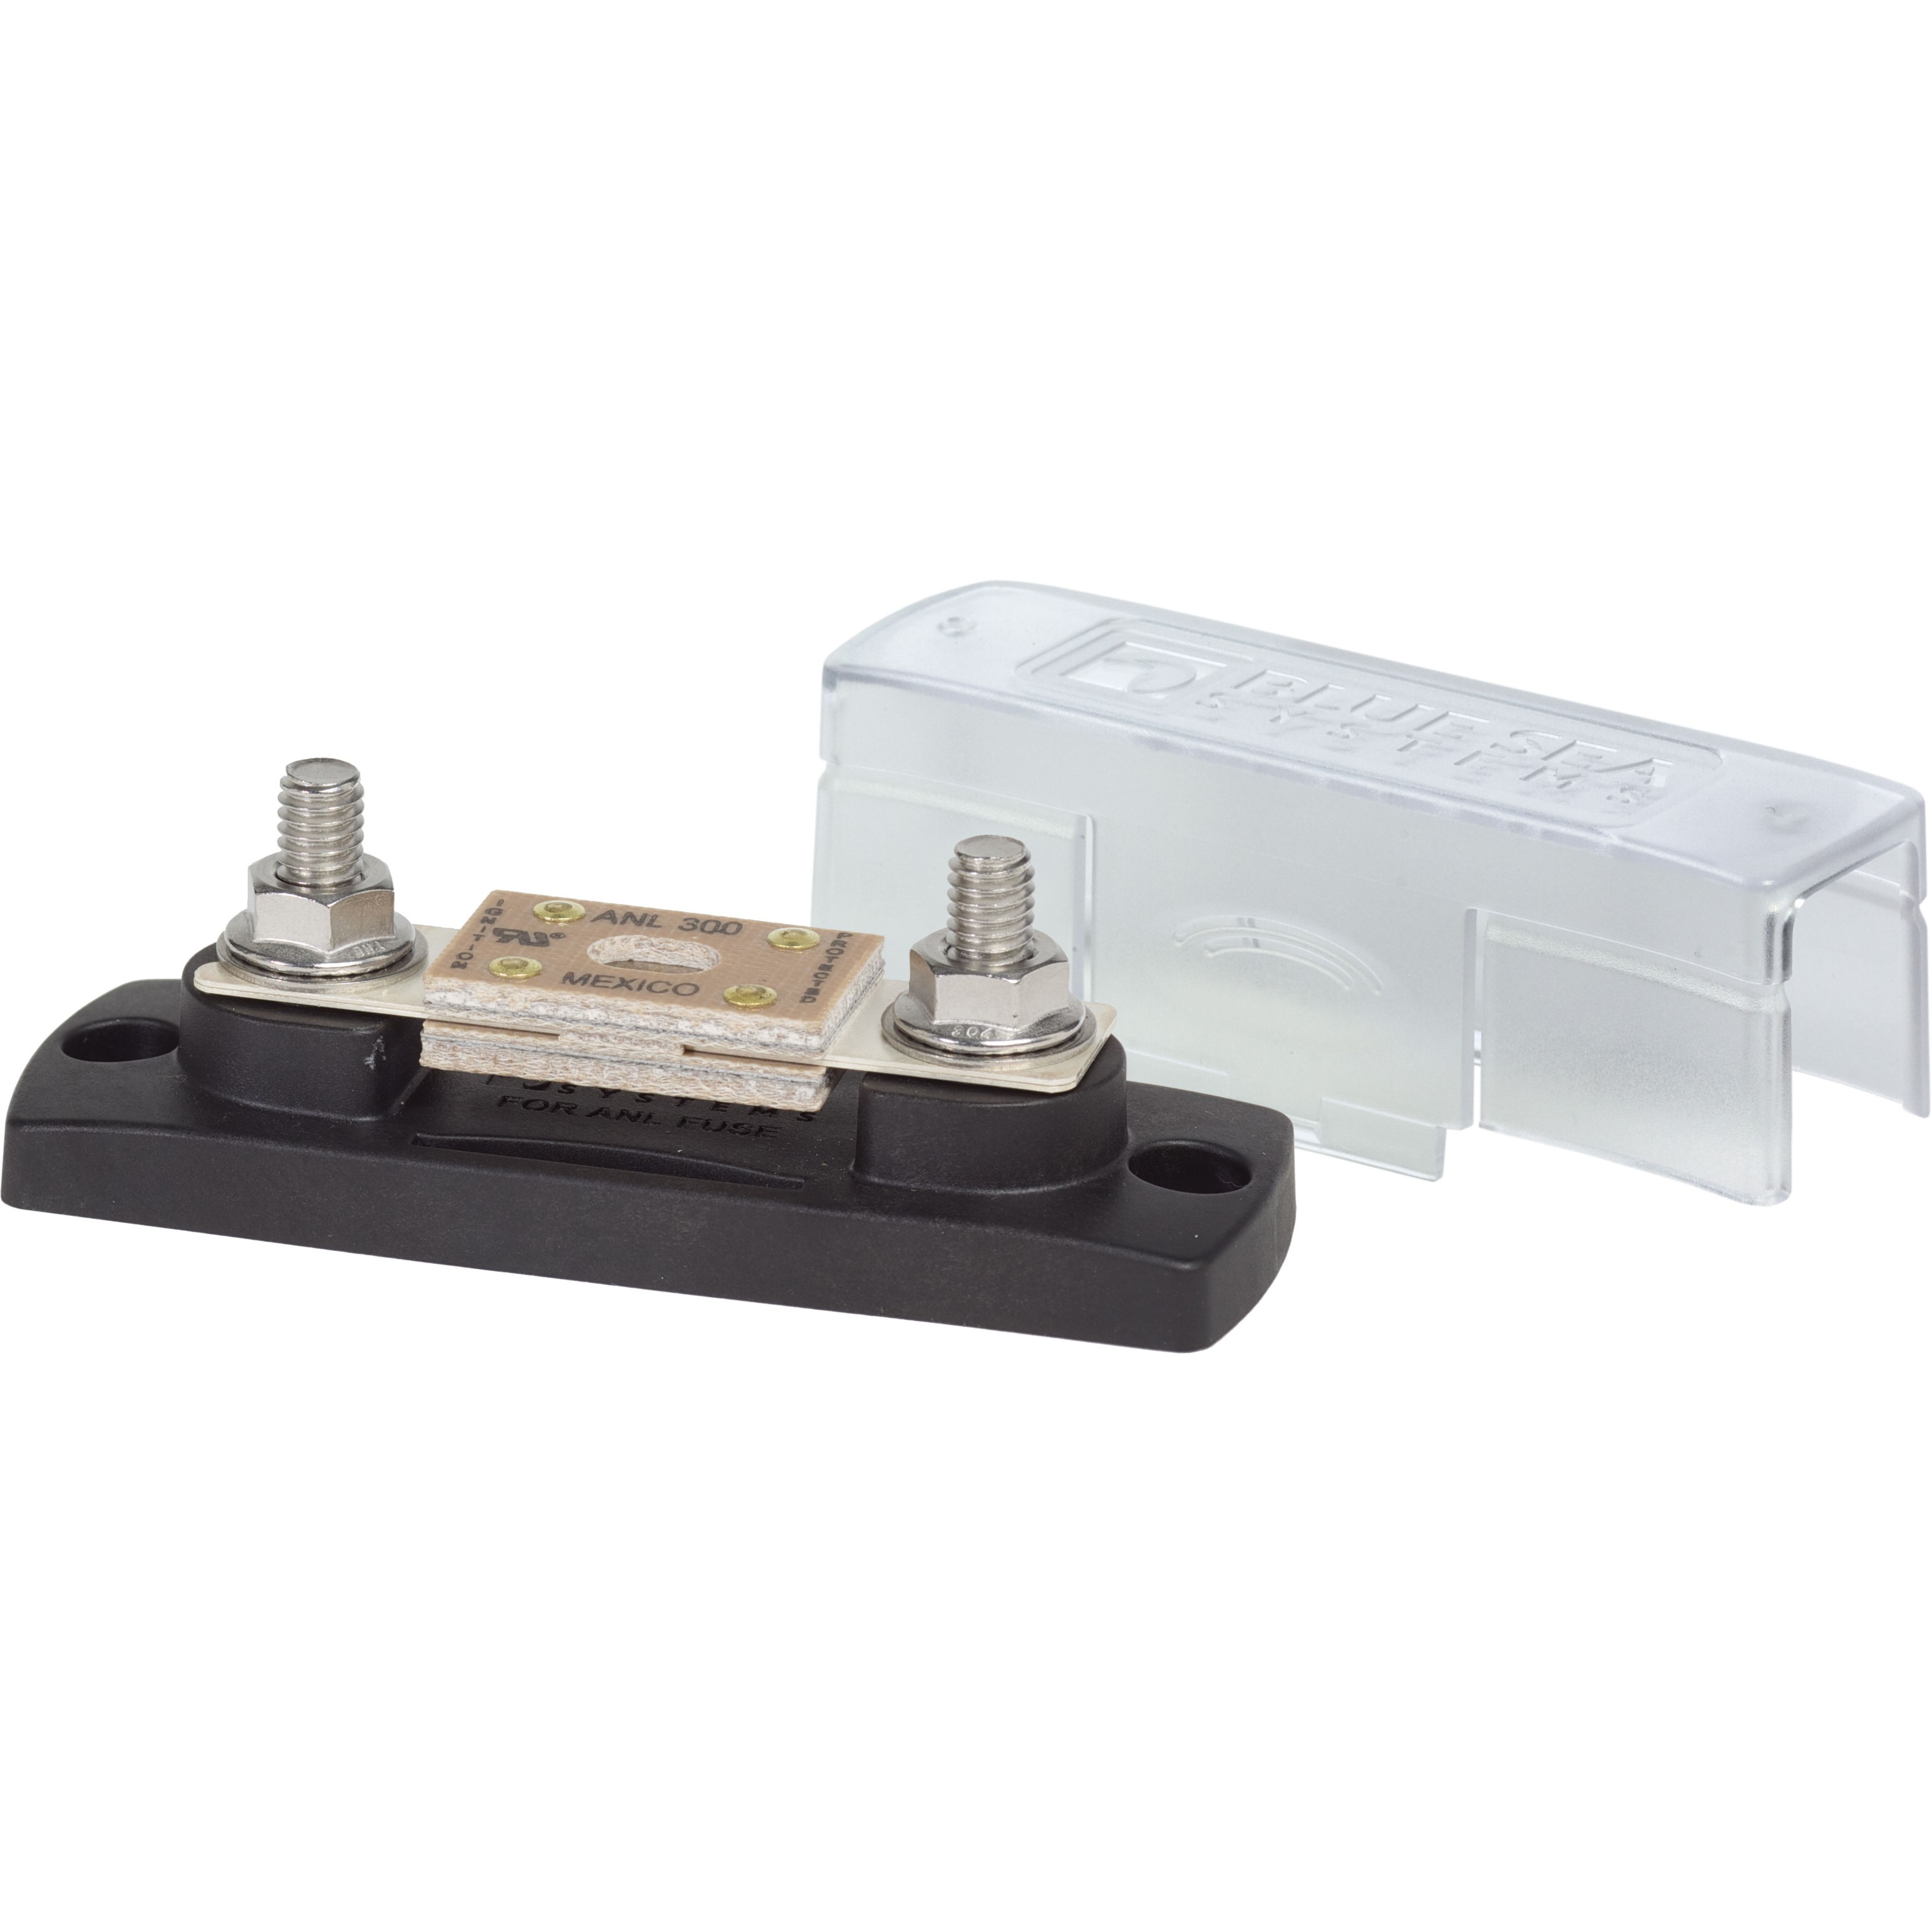 Blue Sea 5005 ANL Fuse Block with Insulating Cover - 35 to 300A